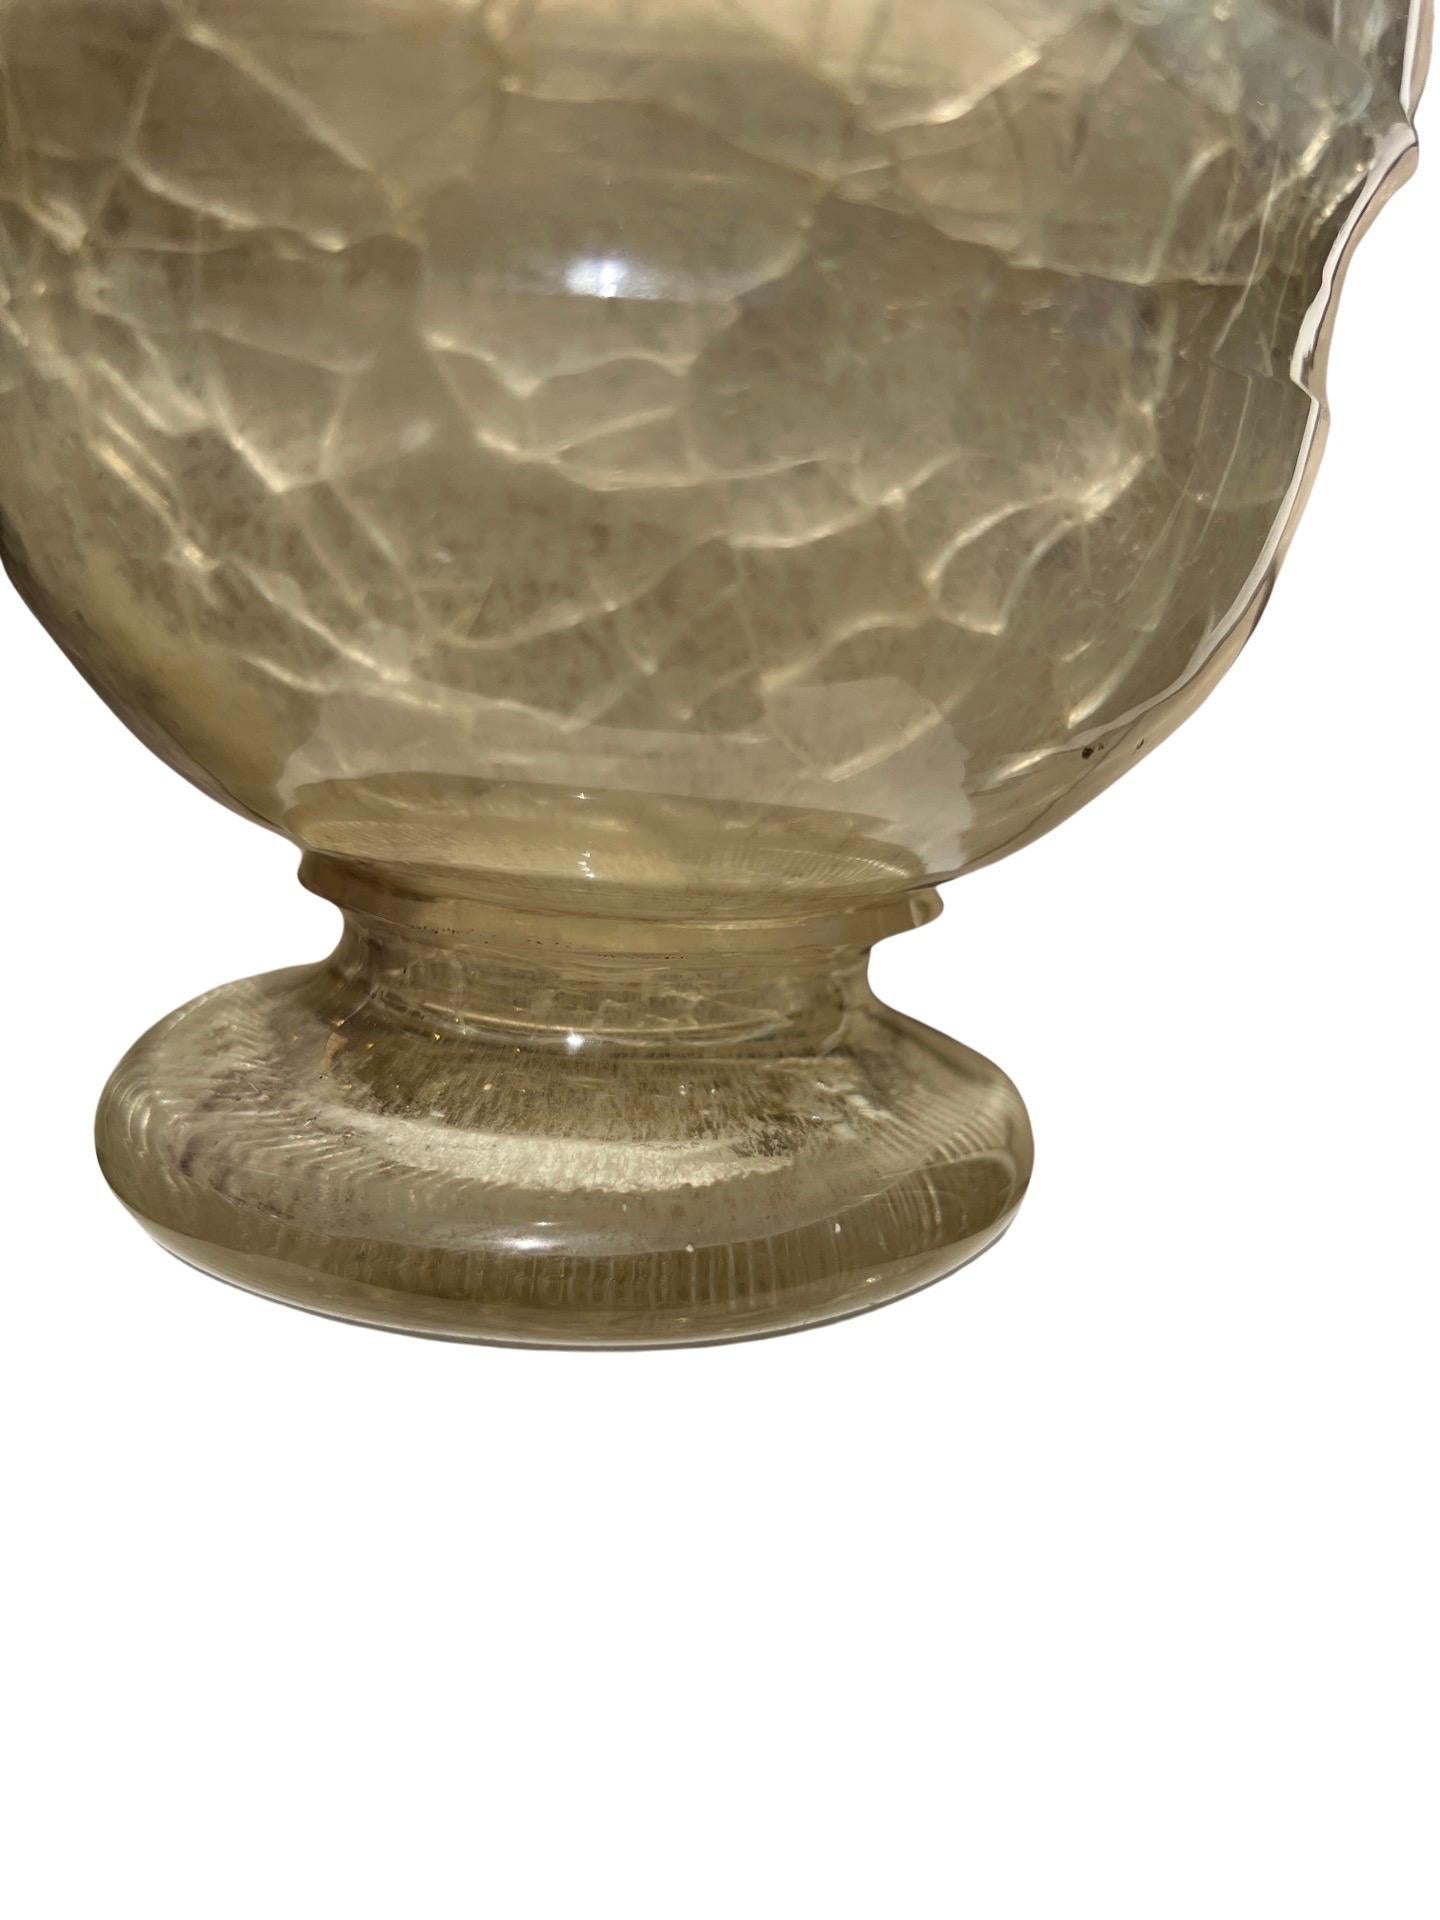 After The Roman Antique - Rock Crystal, Glass & Gold Flecking Grand Tour Pitcher For Sale 1